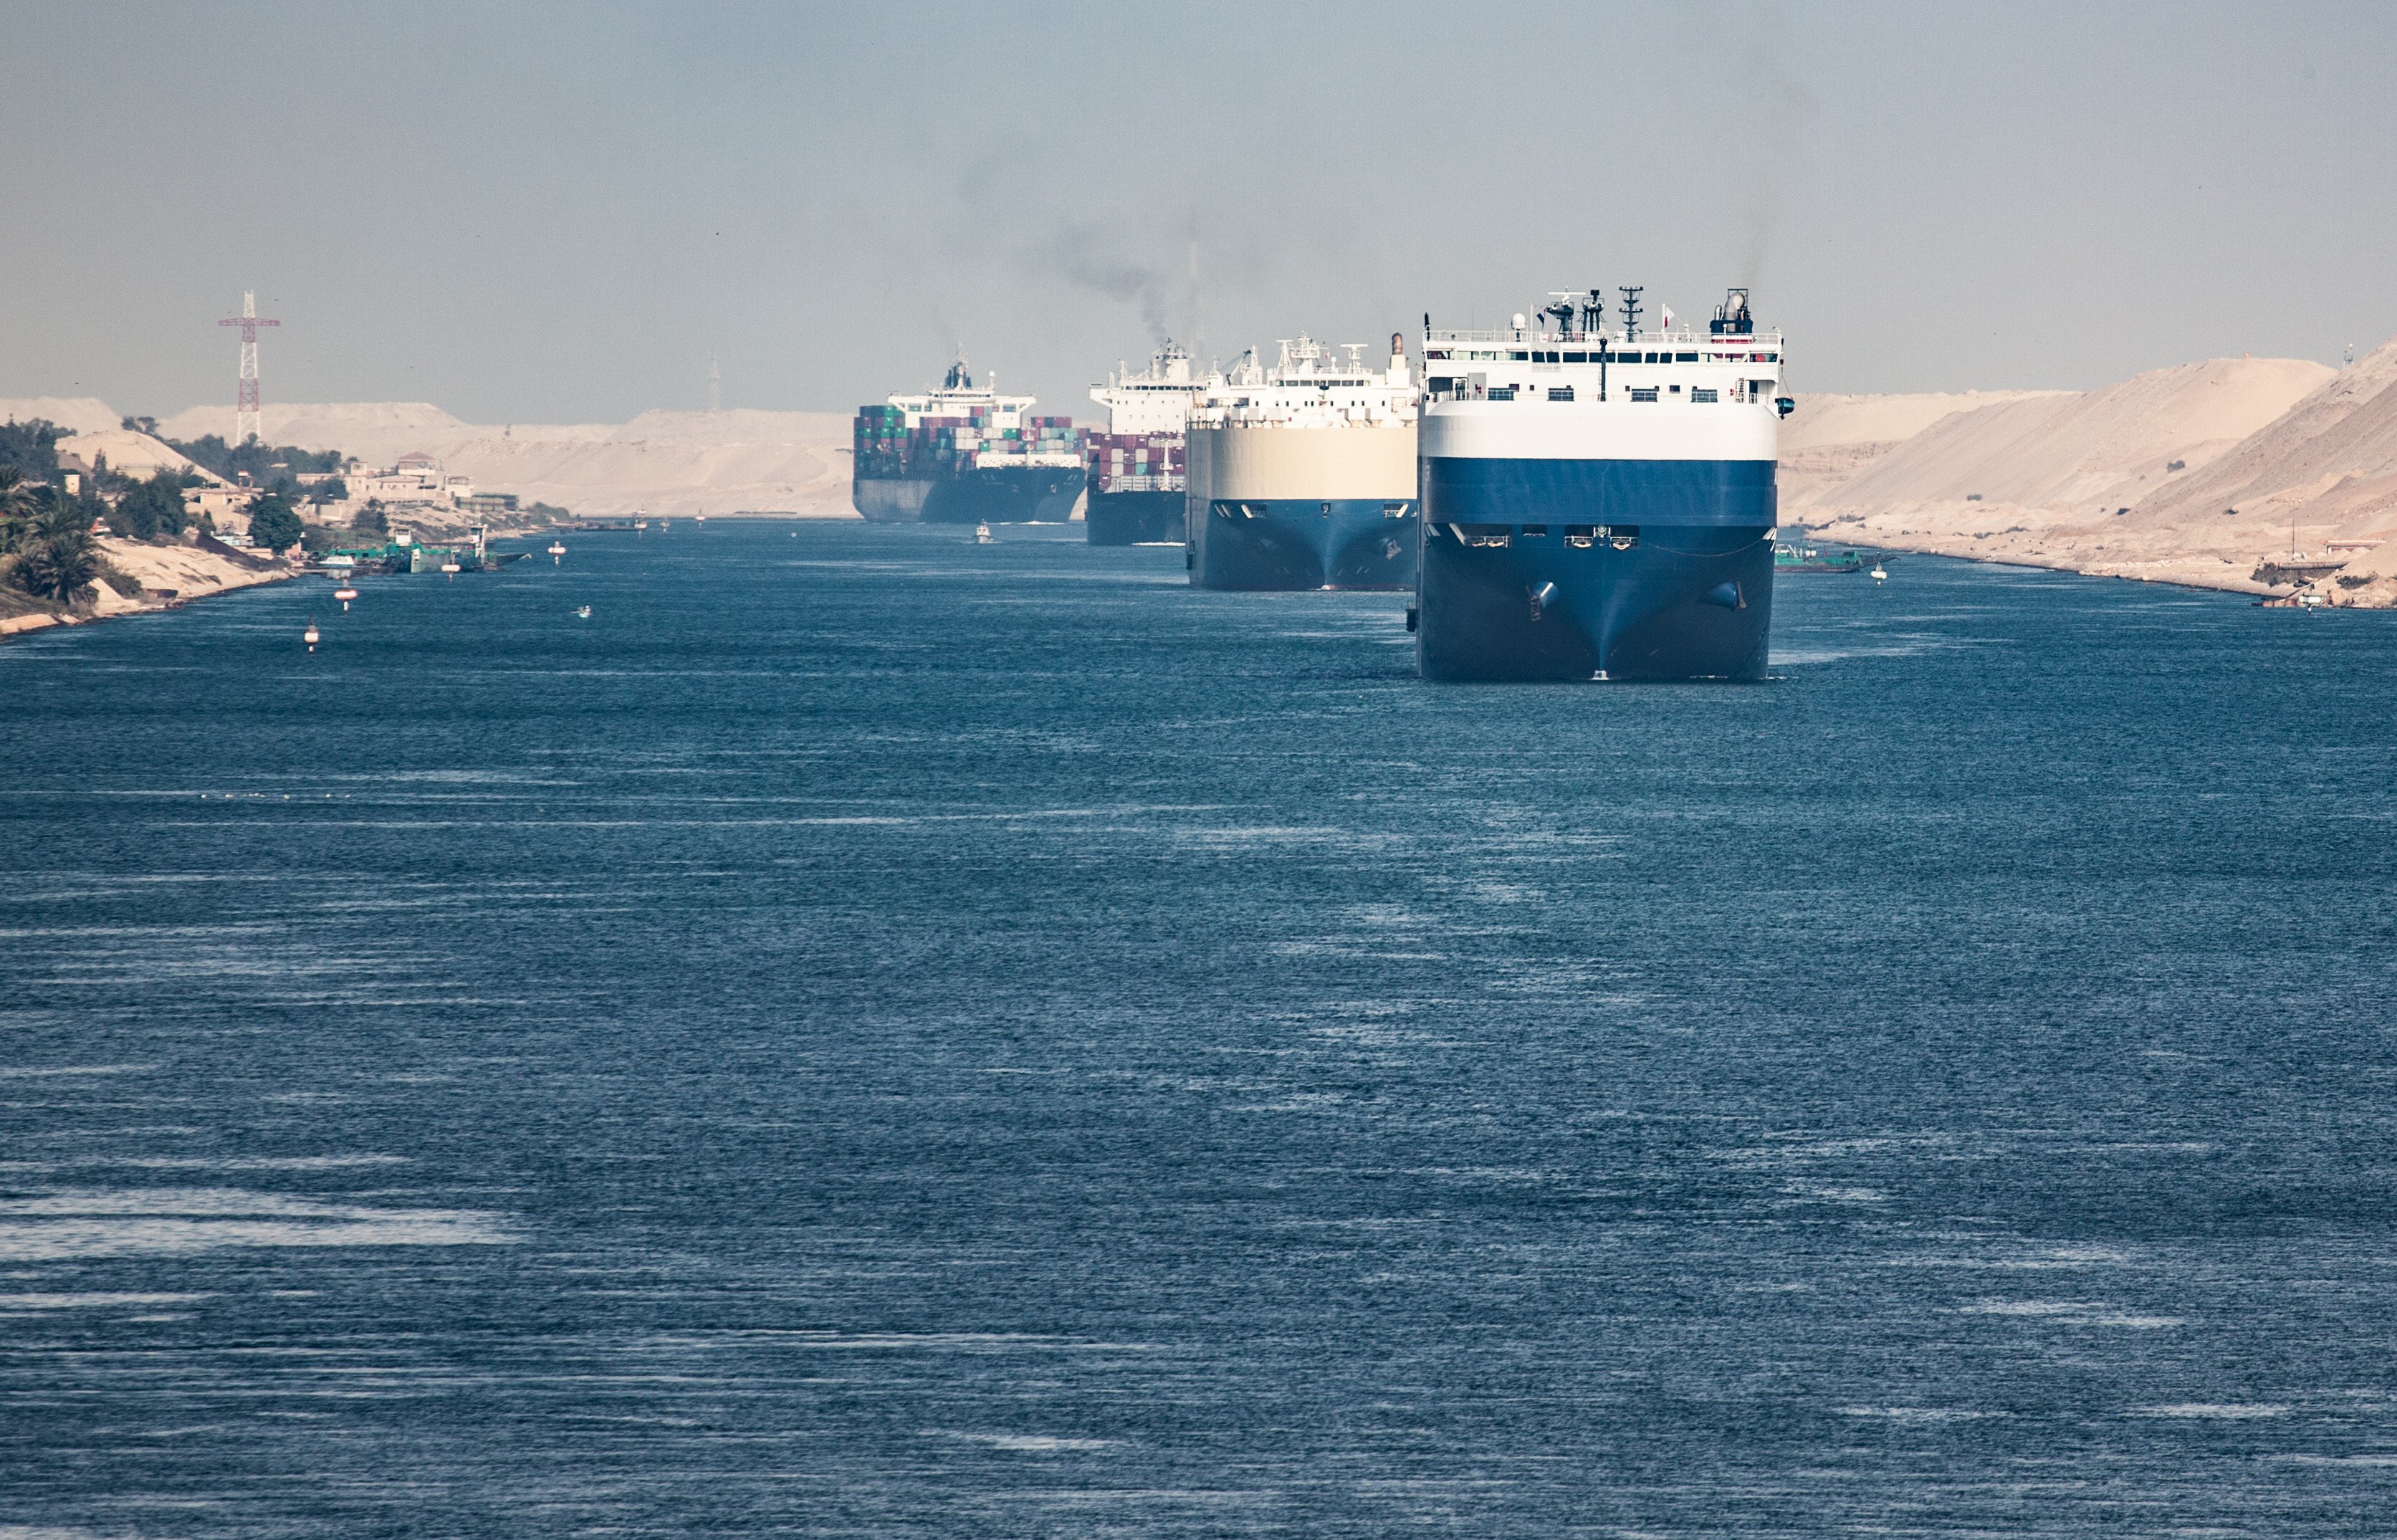 Cargo ships on the Suez Canal in Egypt. A Suez Canal tugboat has sunk after colliding with a Hong Kong-flagged LPG tanker, the canal authority said on Saturday. Photo: Shutterstock